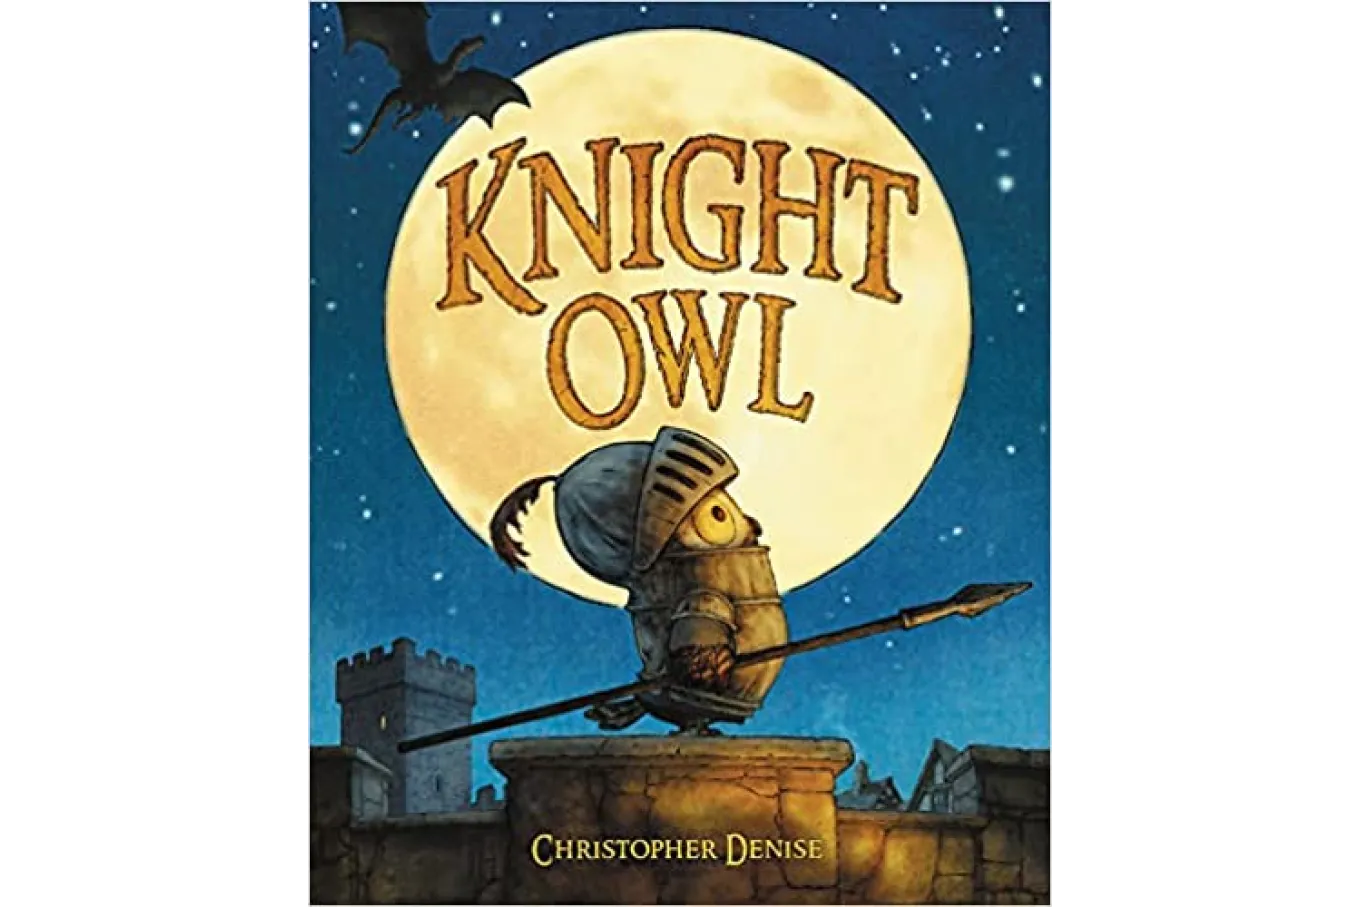 Cover of Knight Owl